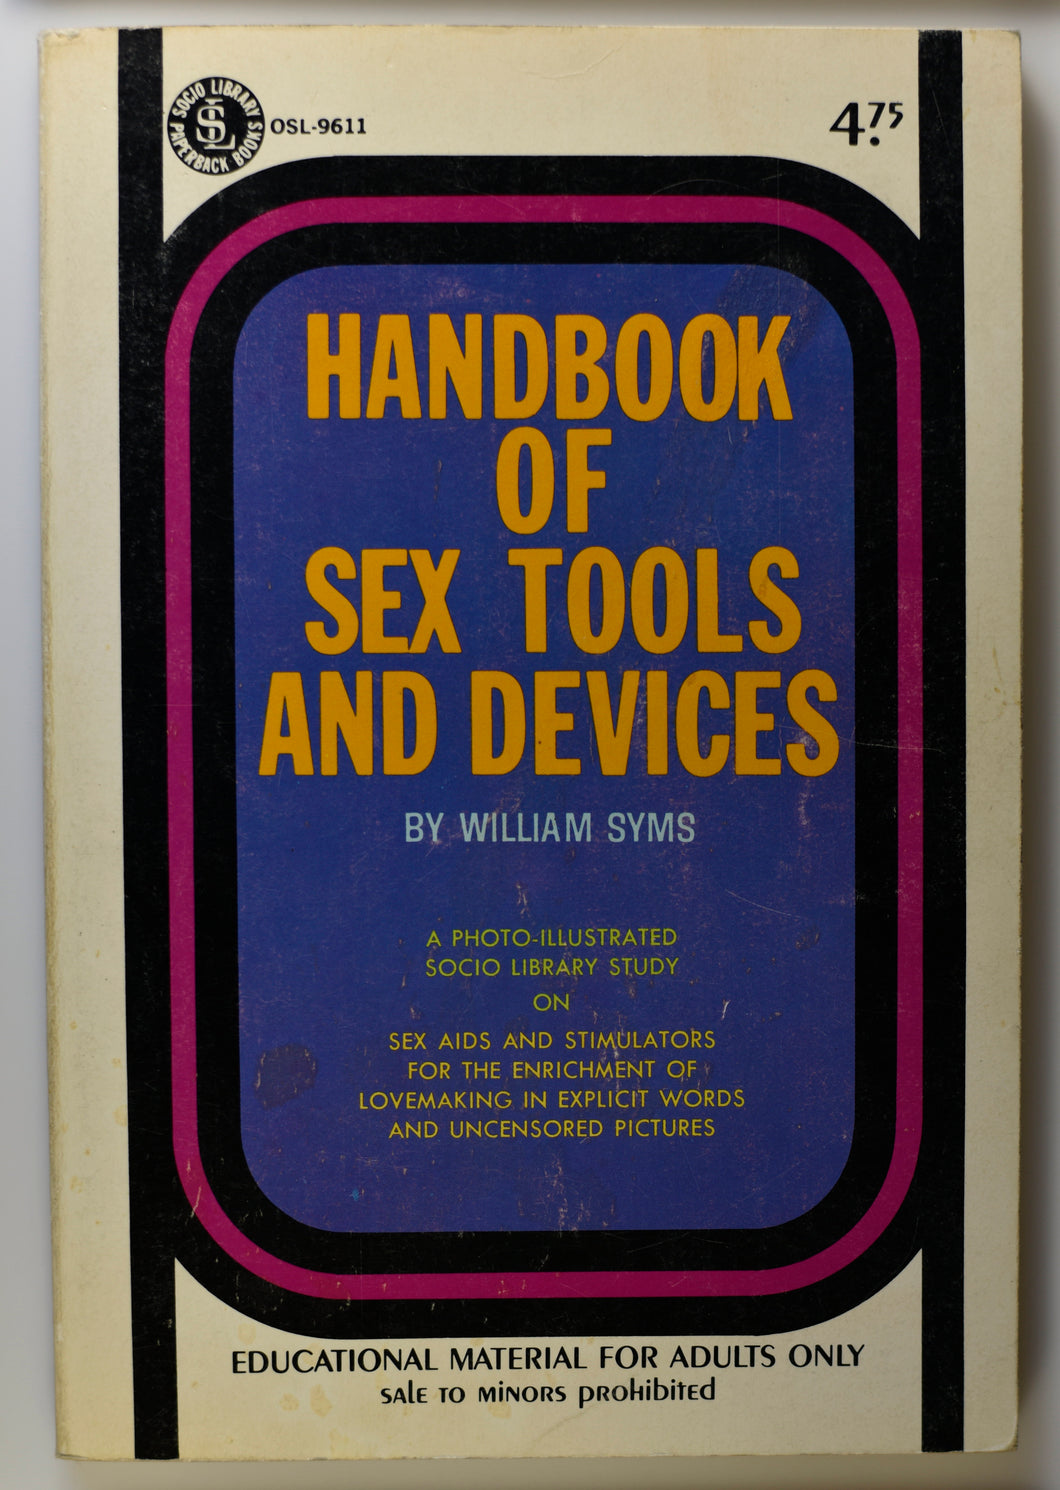 HANDBOOK OF SEX TOOLS AND DEVICES COVER